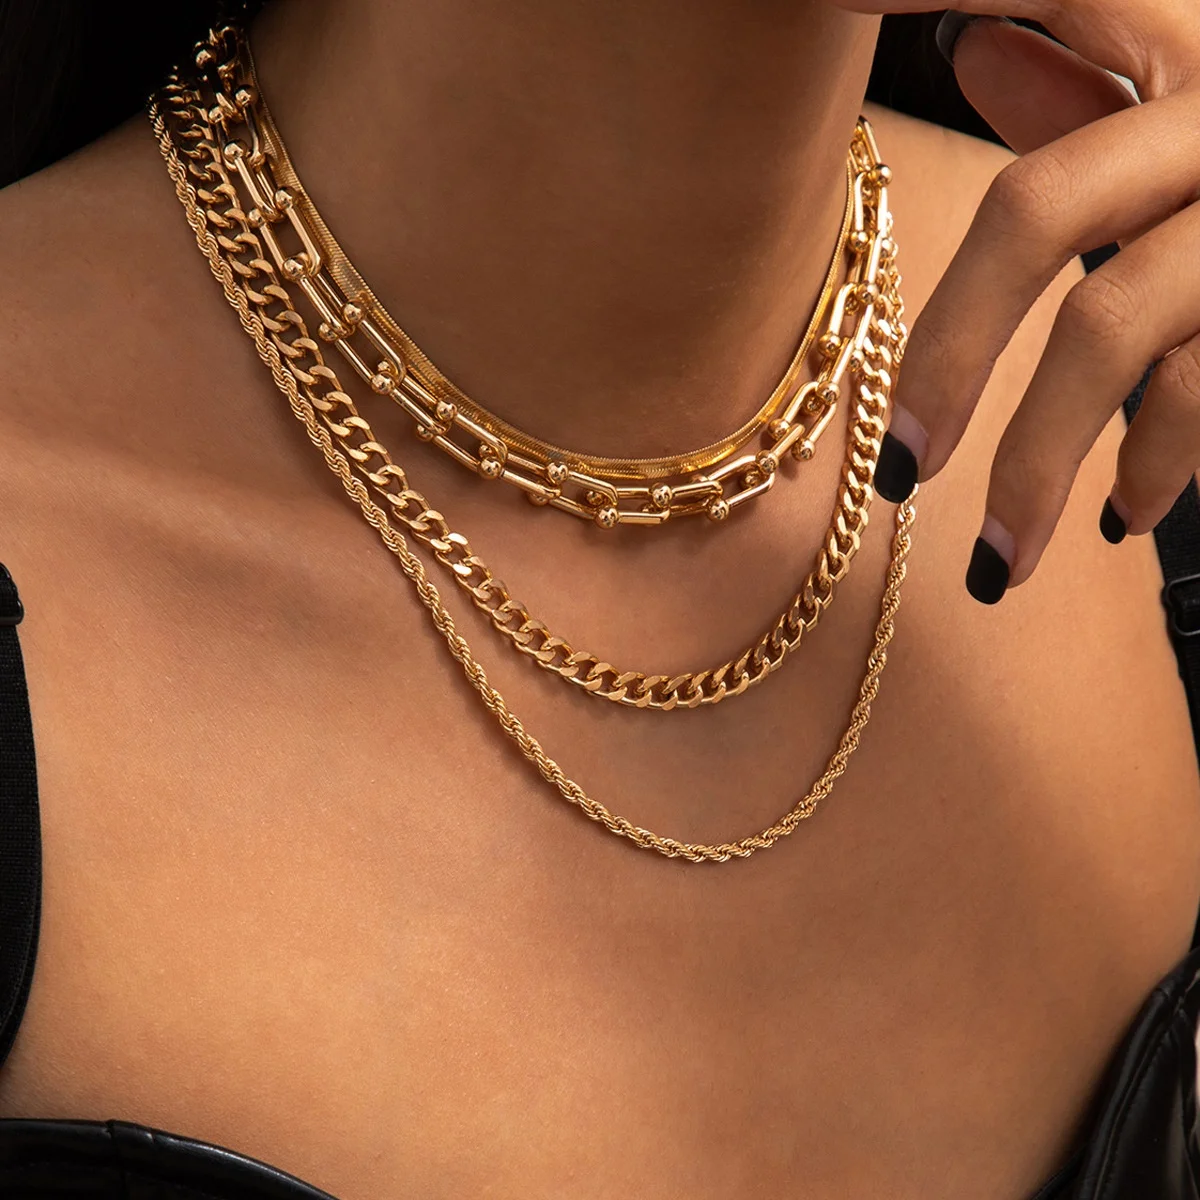 

4 Pcs/Set Exaggerated U Shape Choker Necklace For Women Hip Hop Twist Flat Snake Chain Fashion Clavicle Chain Necklace, Picture shows